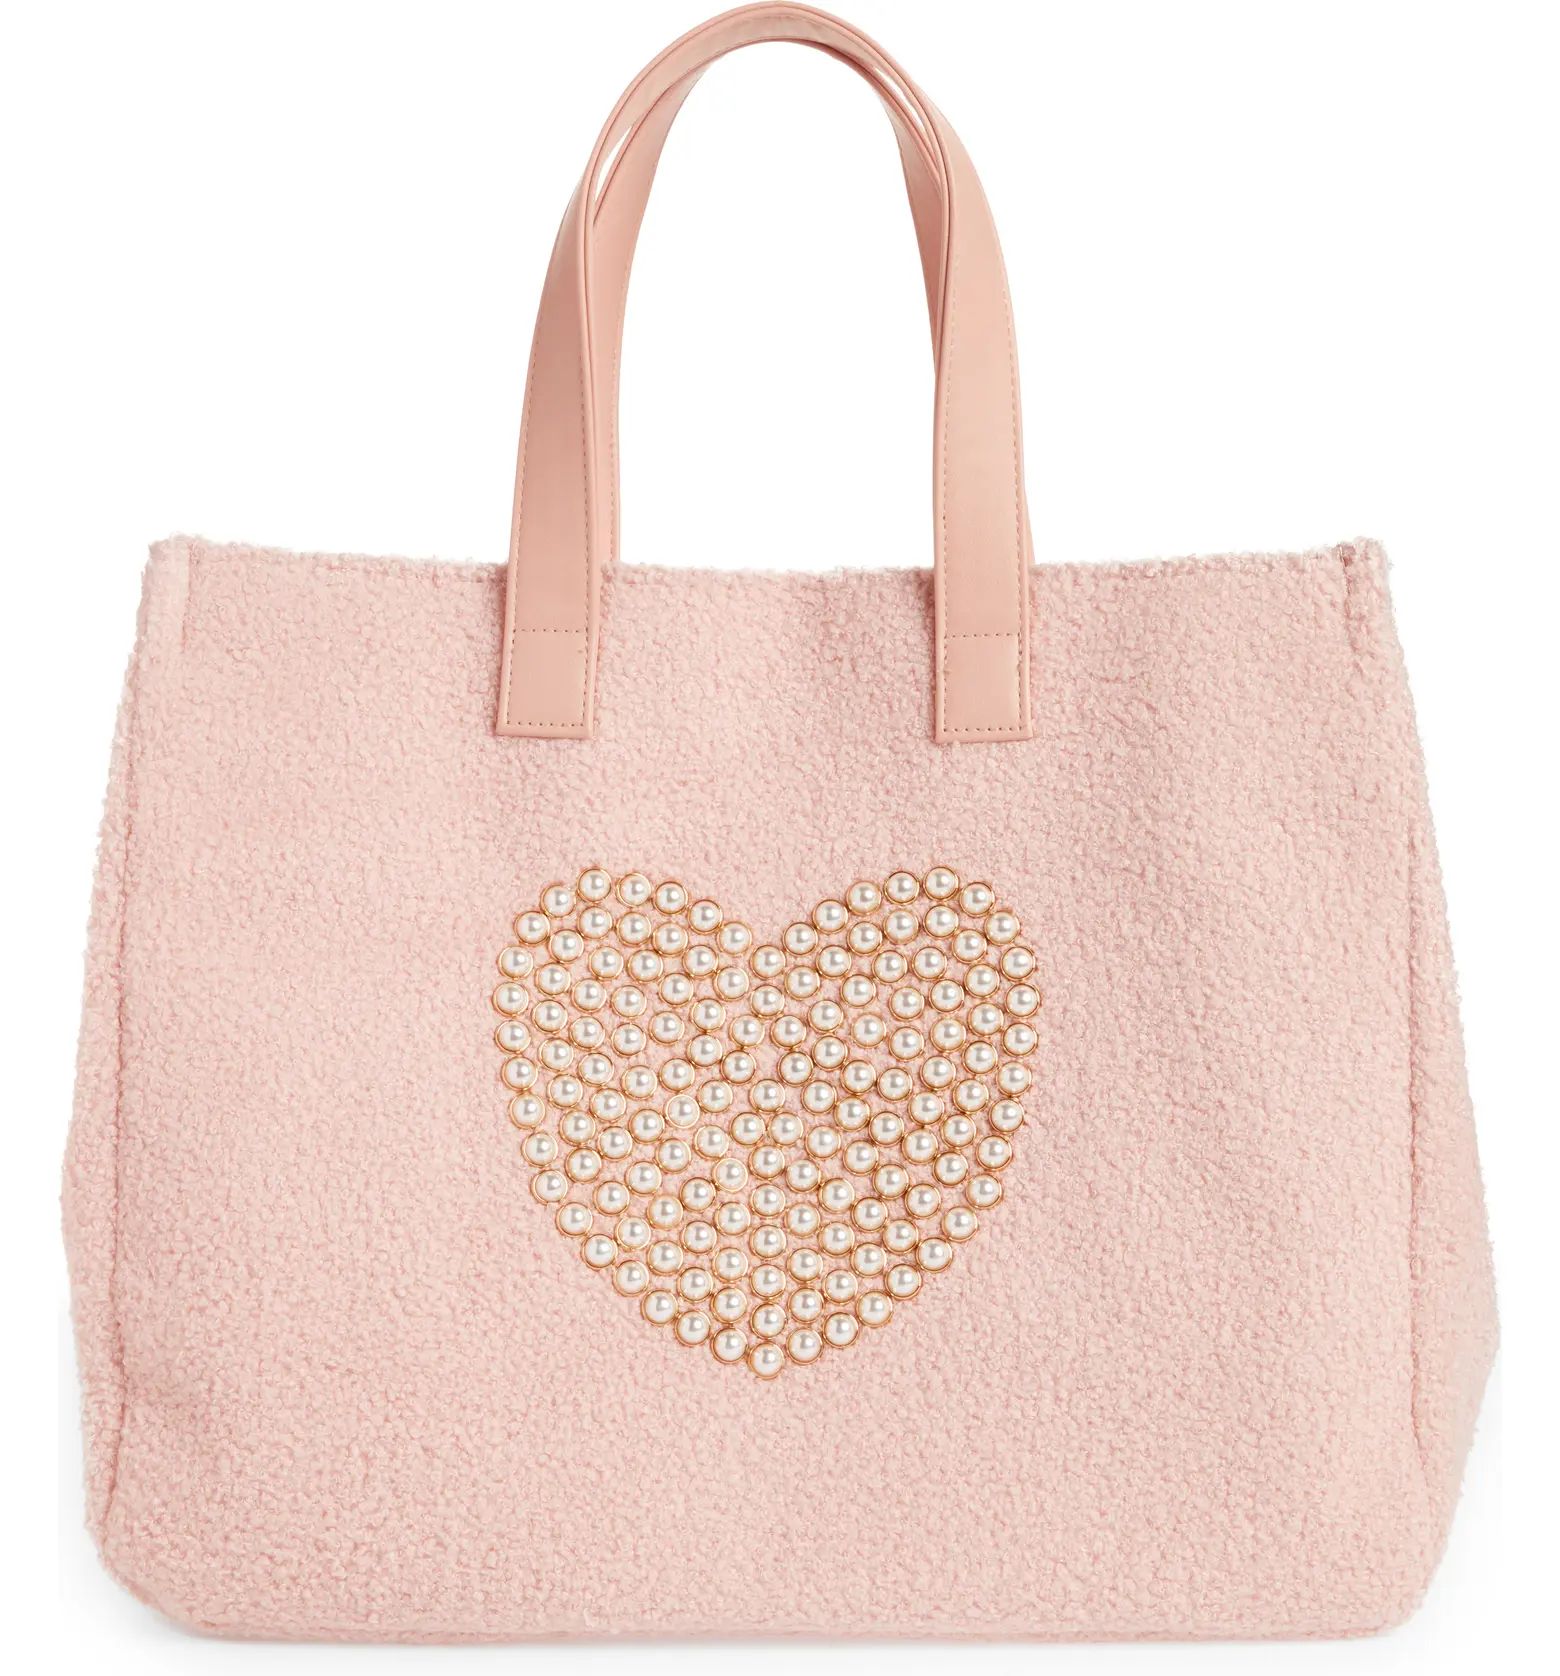 Heart Teddy Tote | Nordstrom